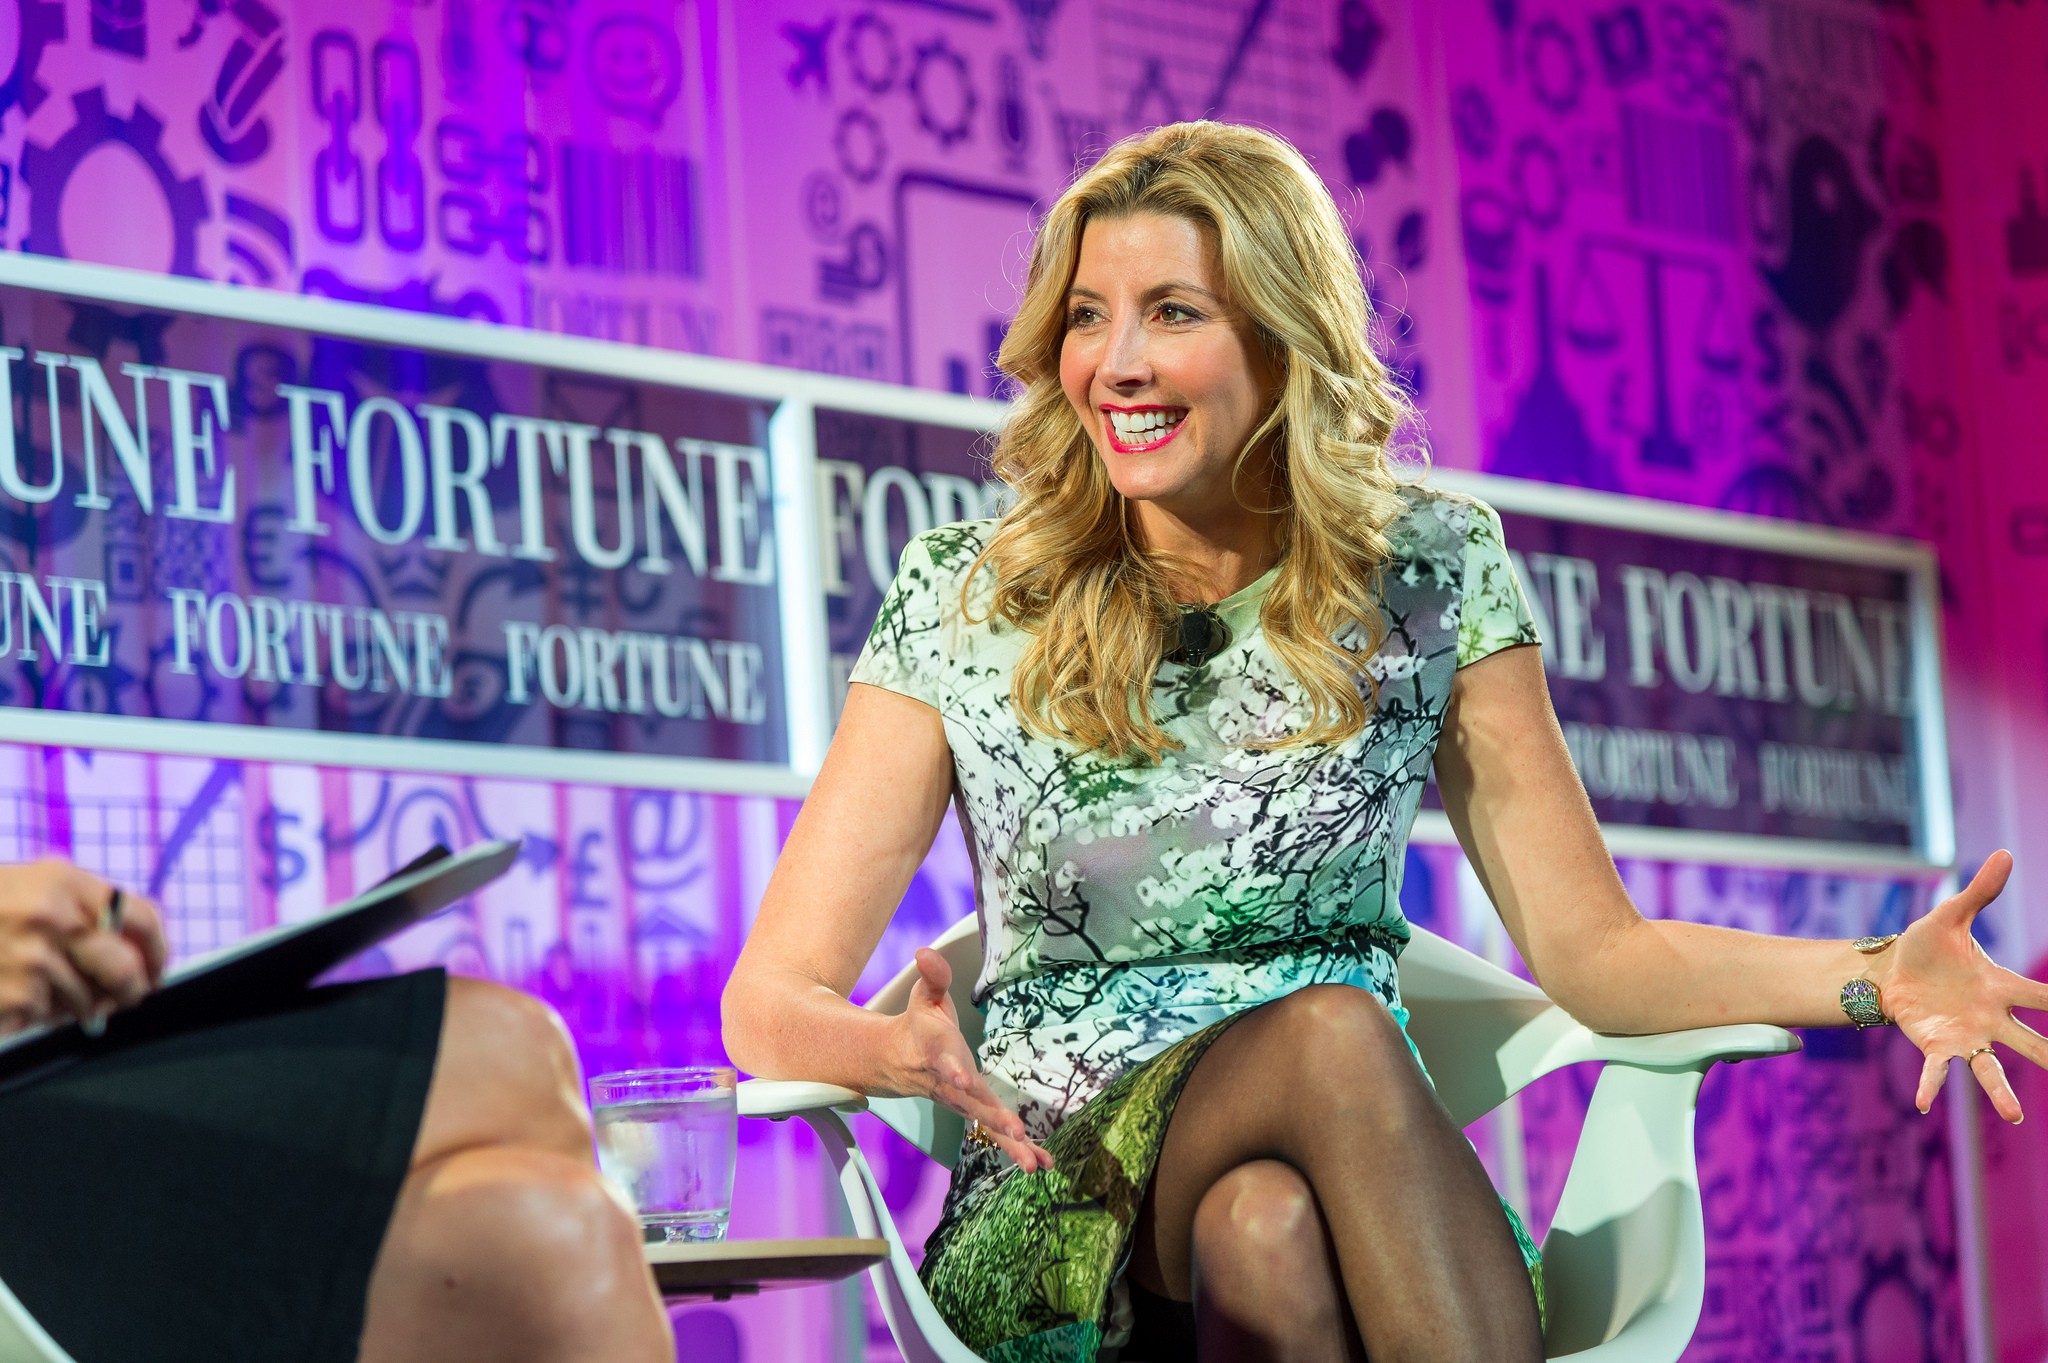 What we learn from Sara Blakely, inventor of Spanx.